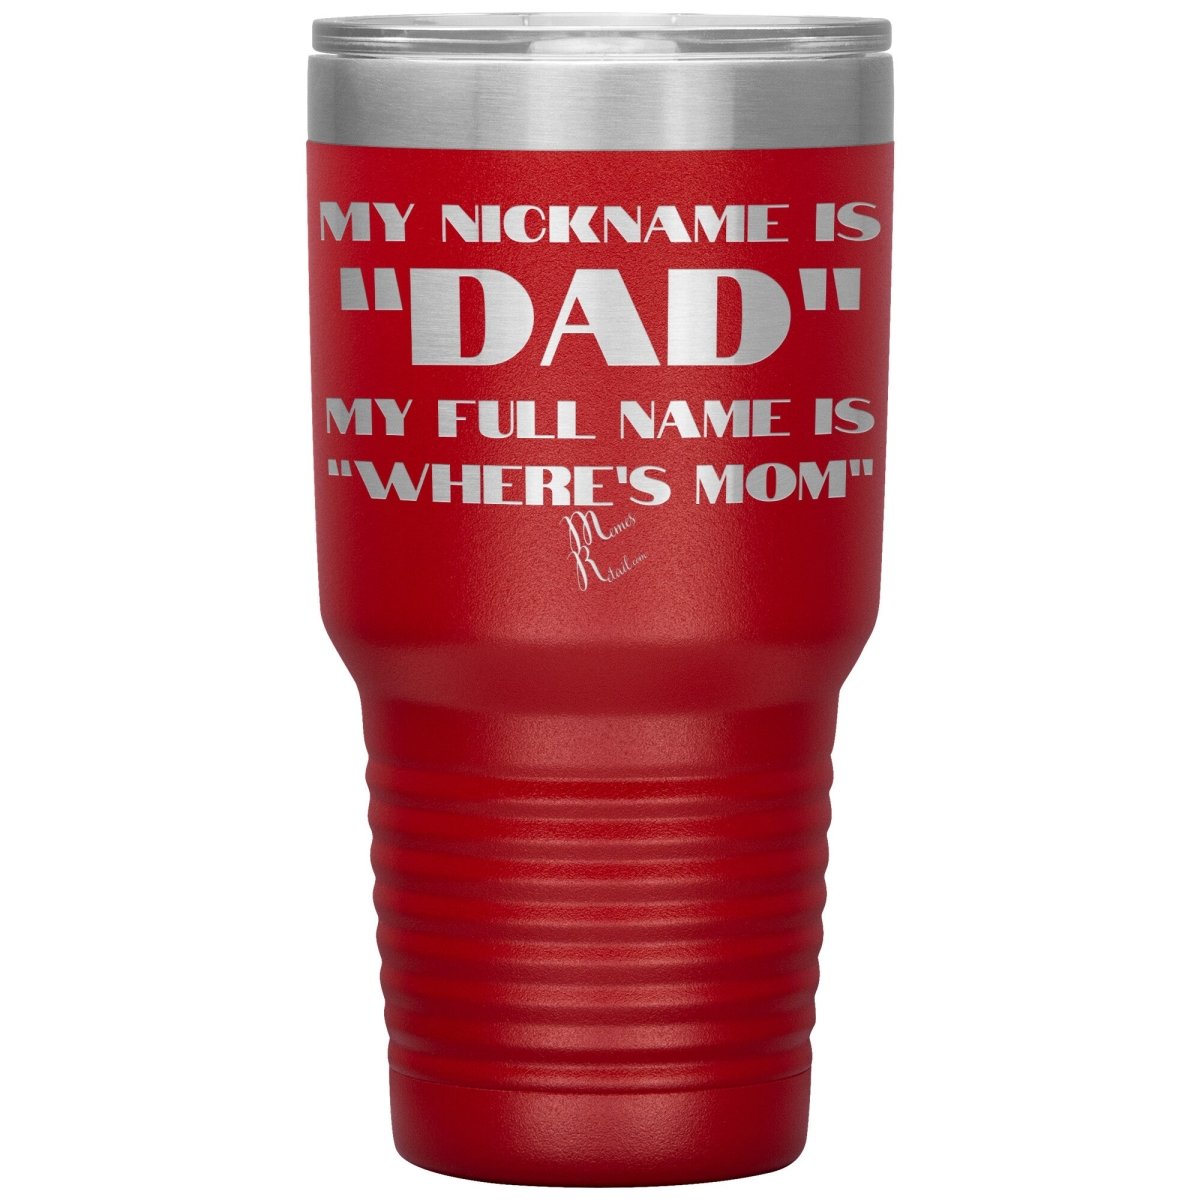 My Nickname is "Dad", My Full Name is "Where's Mom" Tumblers, 30oz Insulated Tumbler / Red - MemesRetail.com